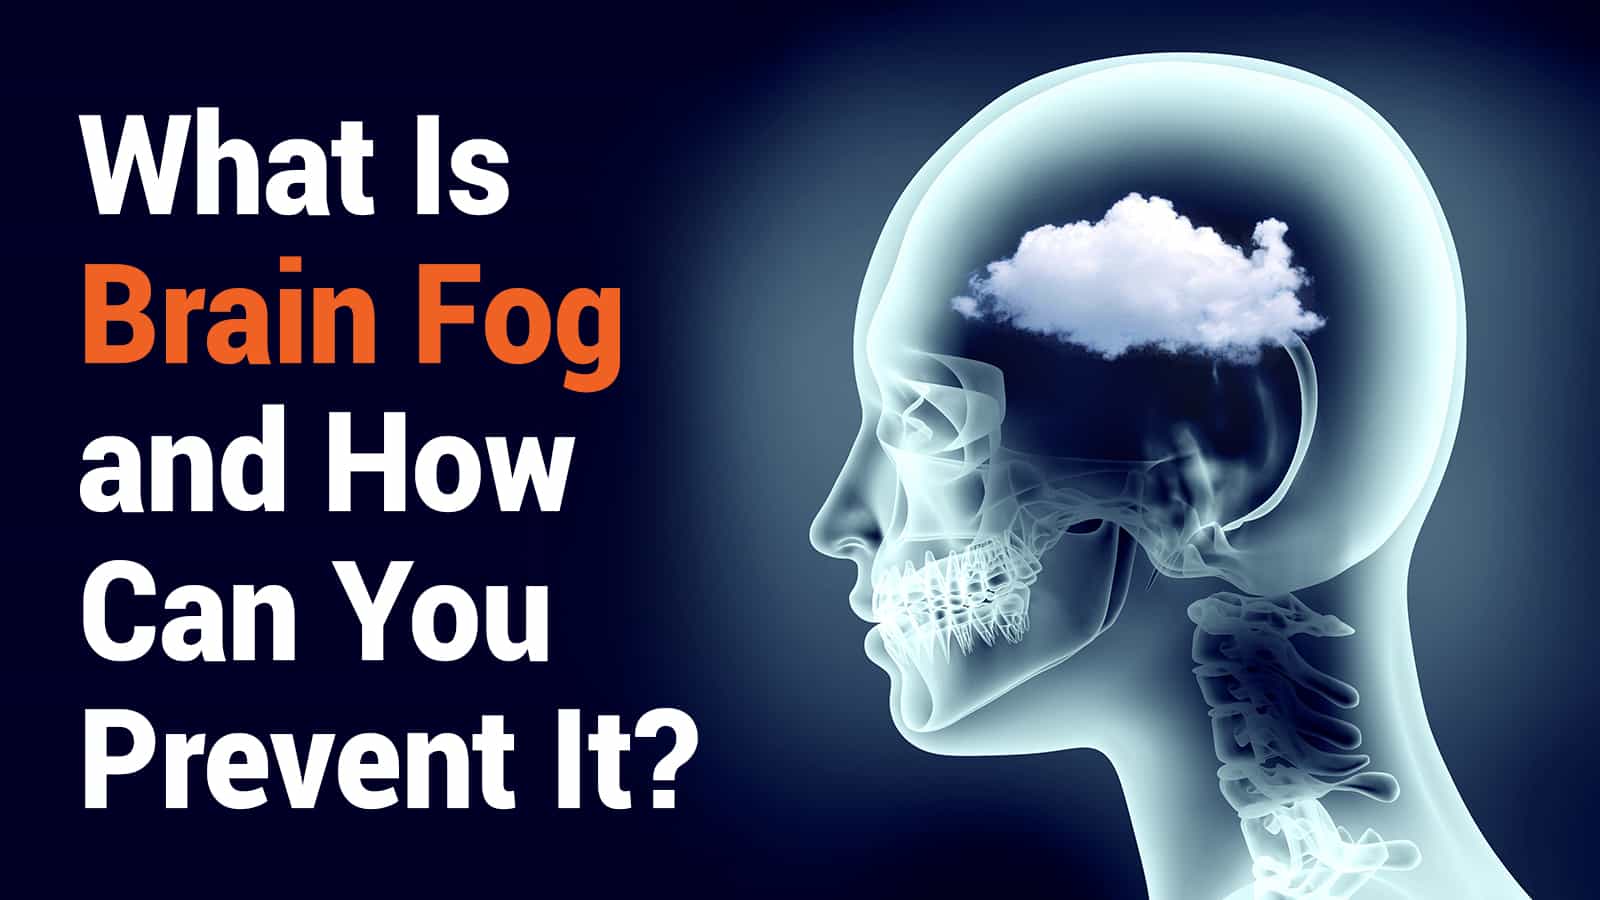 What Is Brain Fog and How Can You Prevent It?